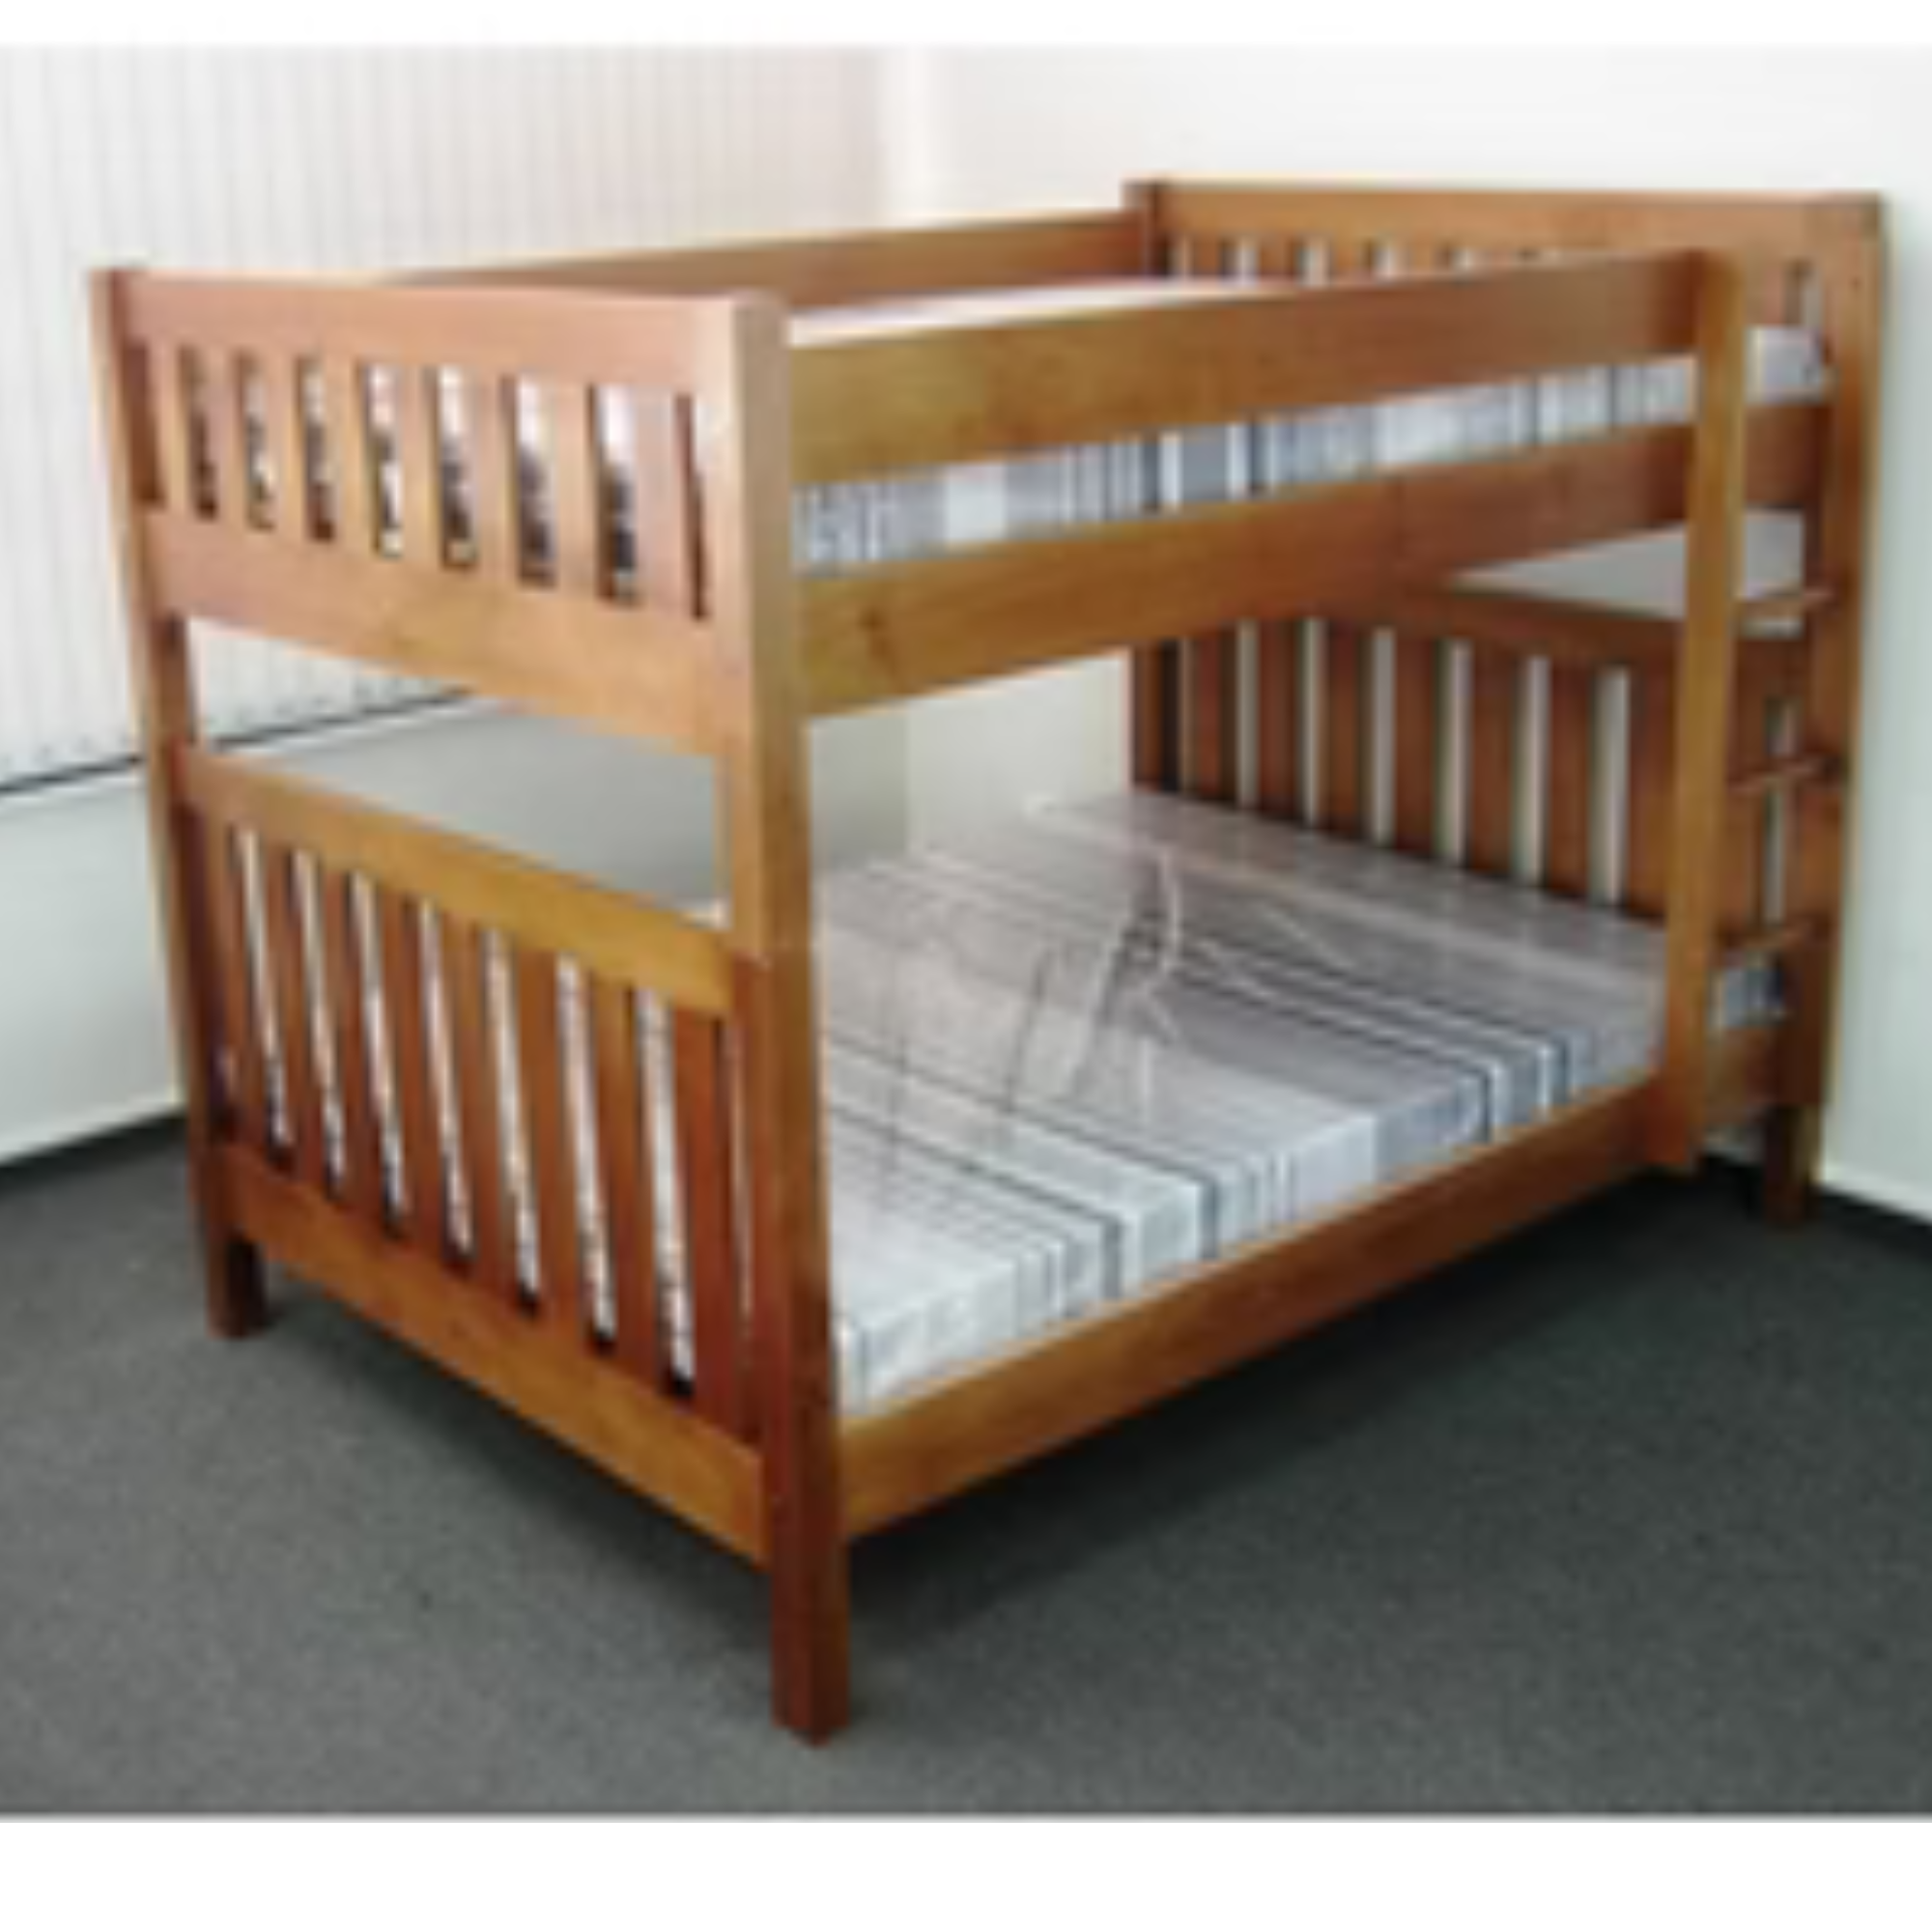 METRO BUNK | ALL SIZES | NZ MADE